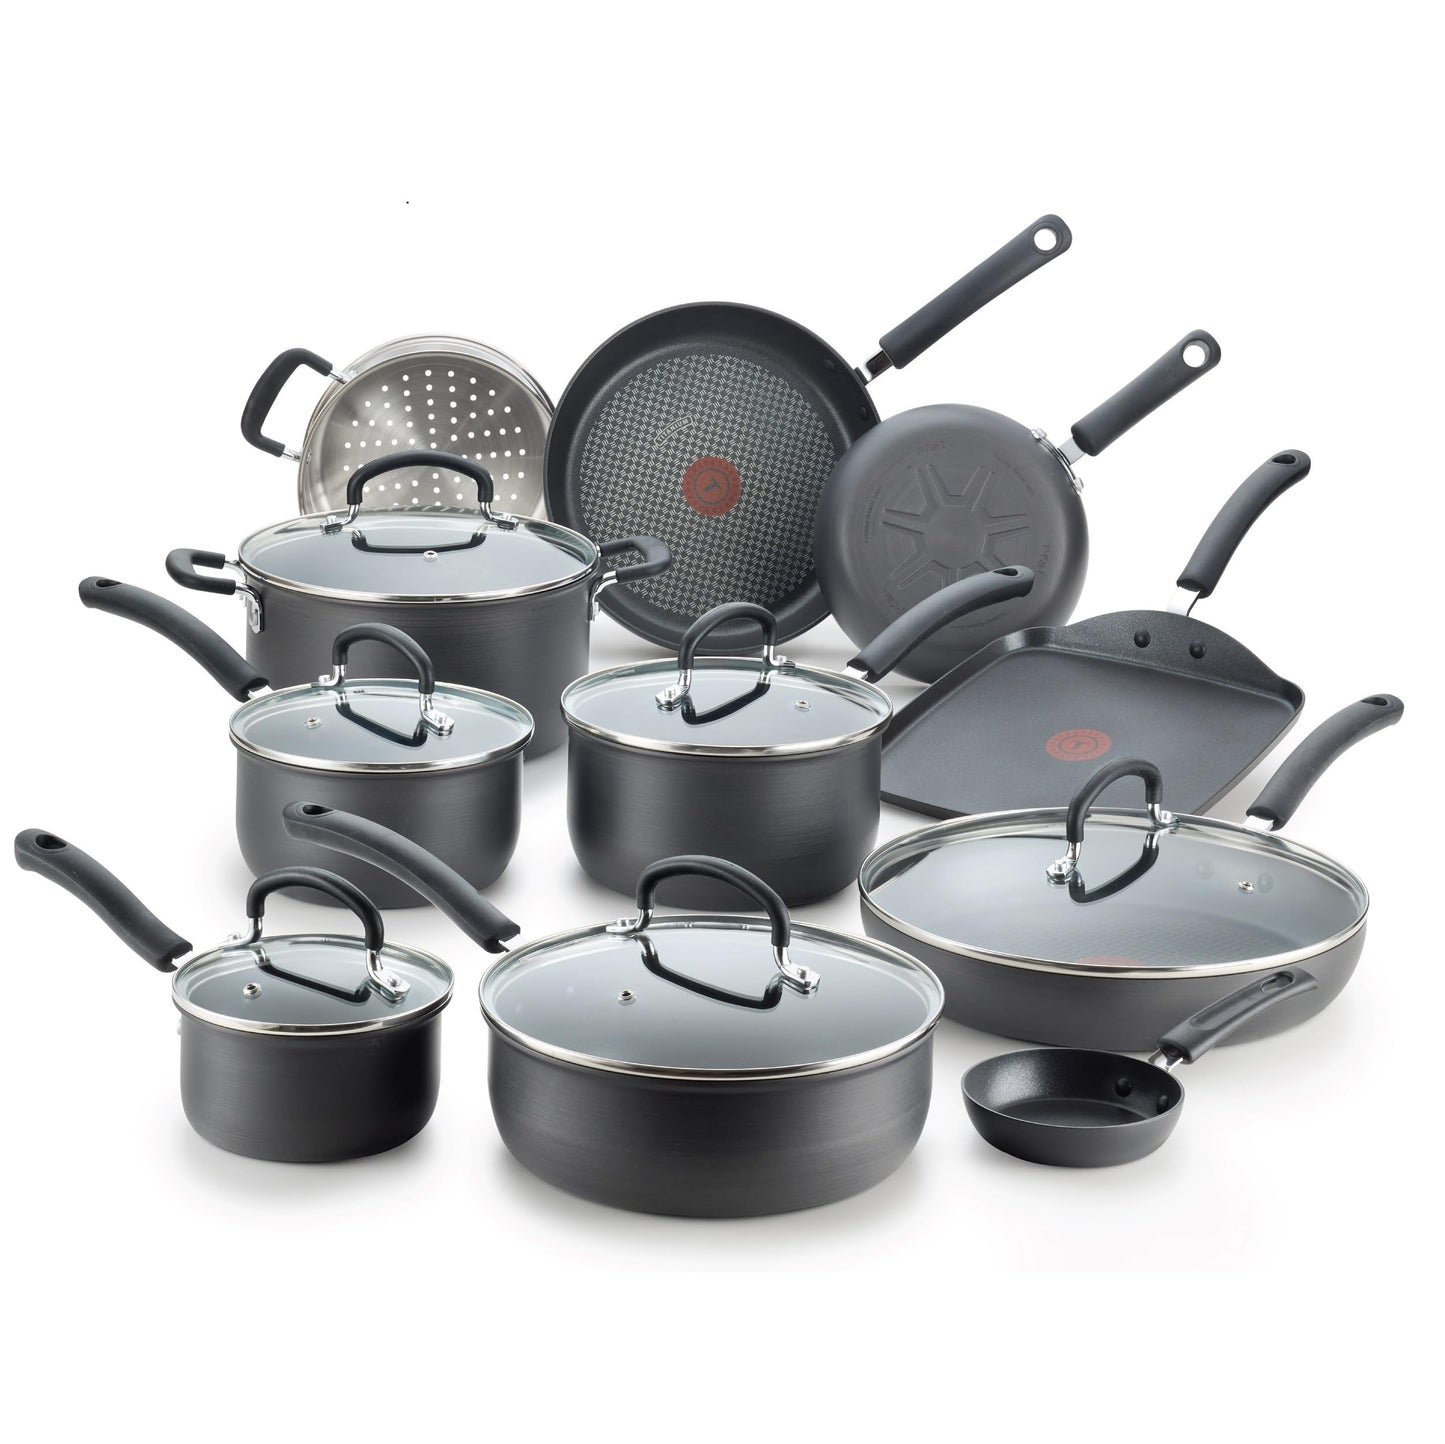 17 pc. T-fal Ultimate Hard Anodized Nonstick Cookware Set